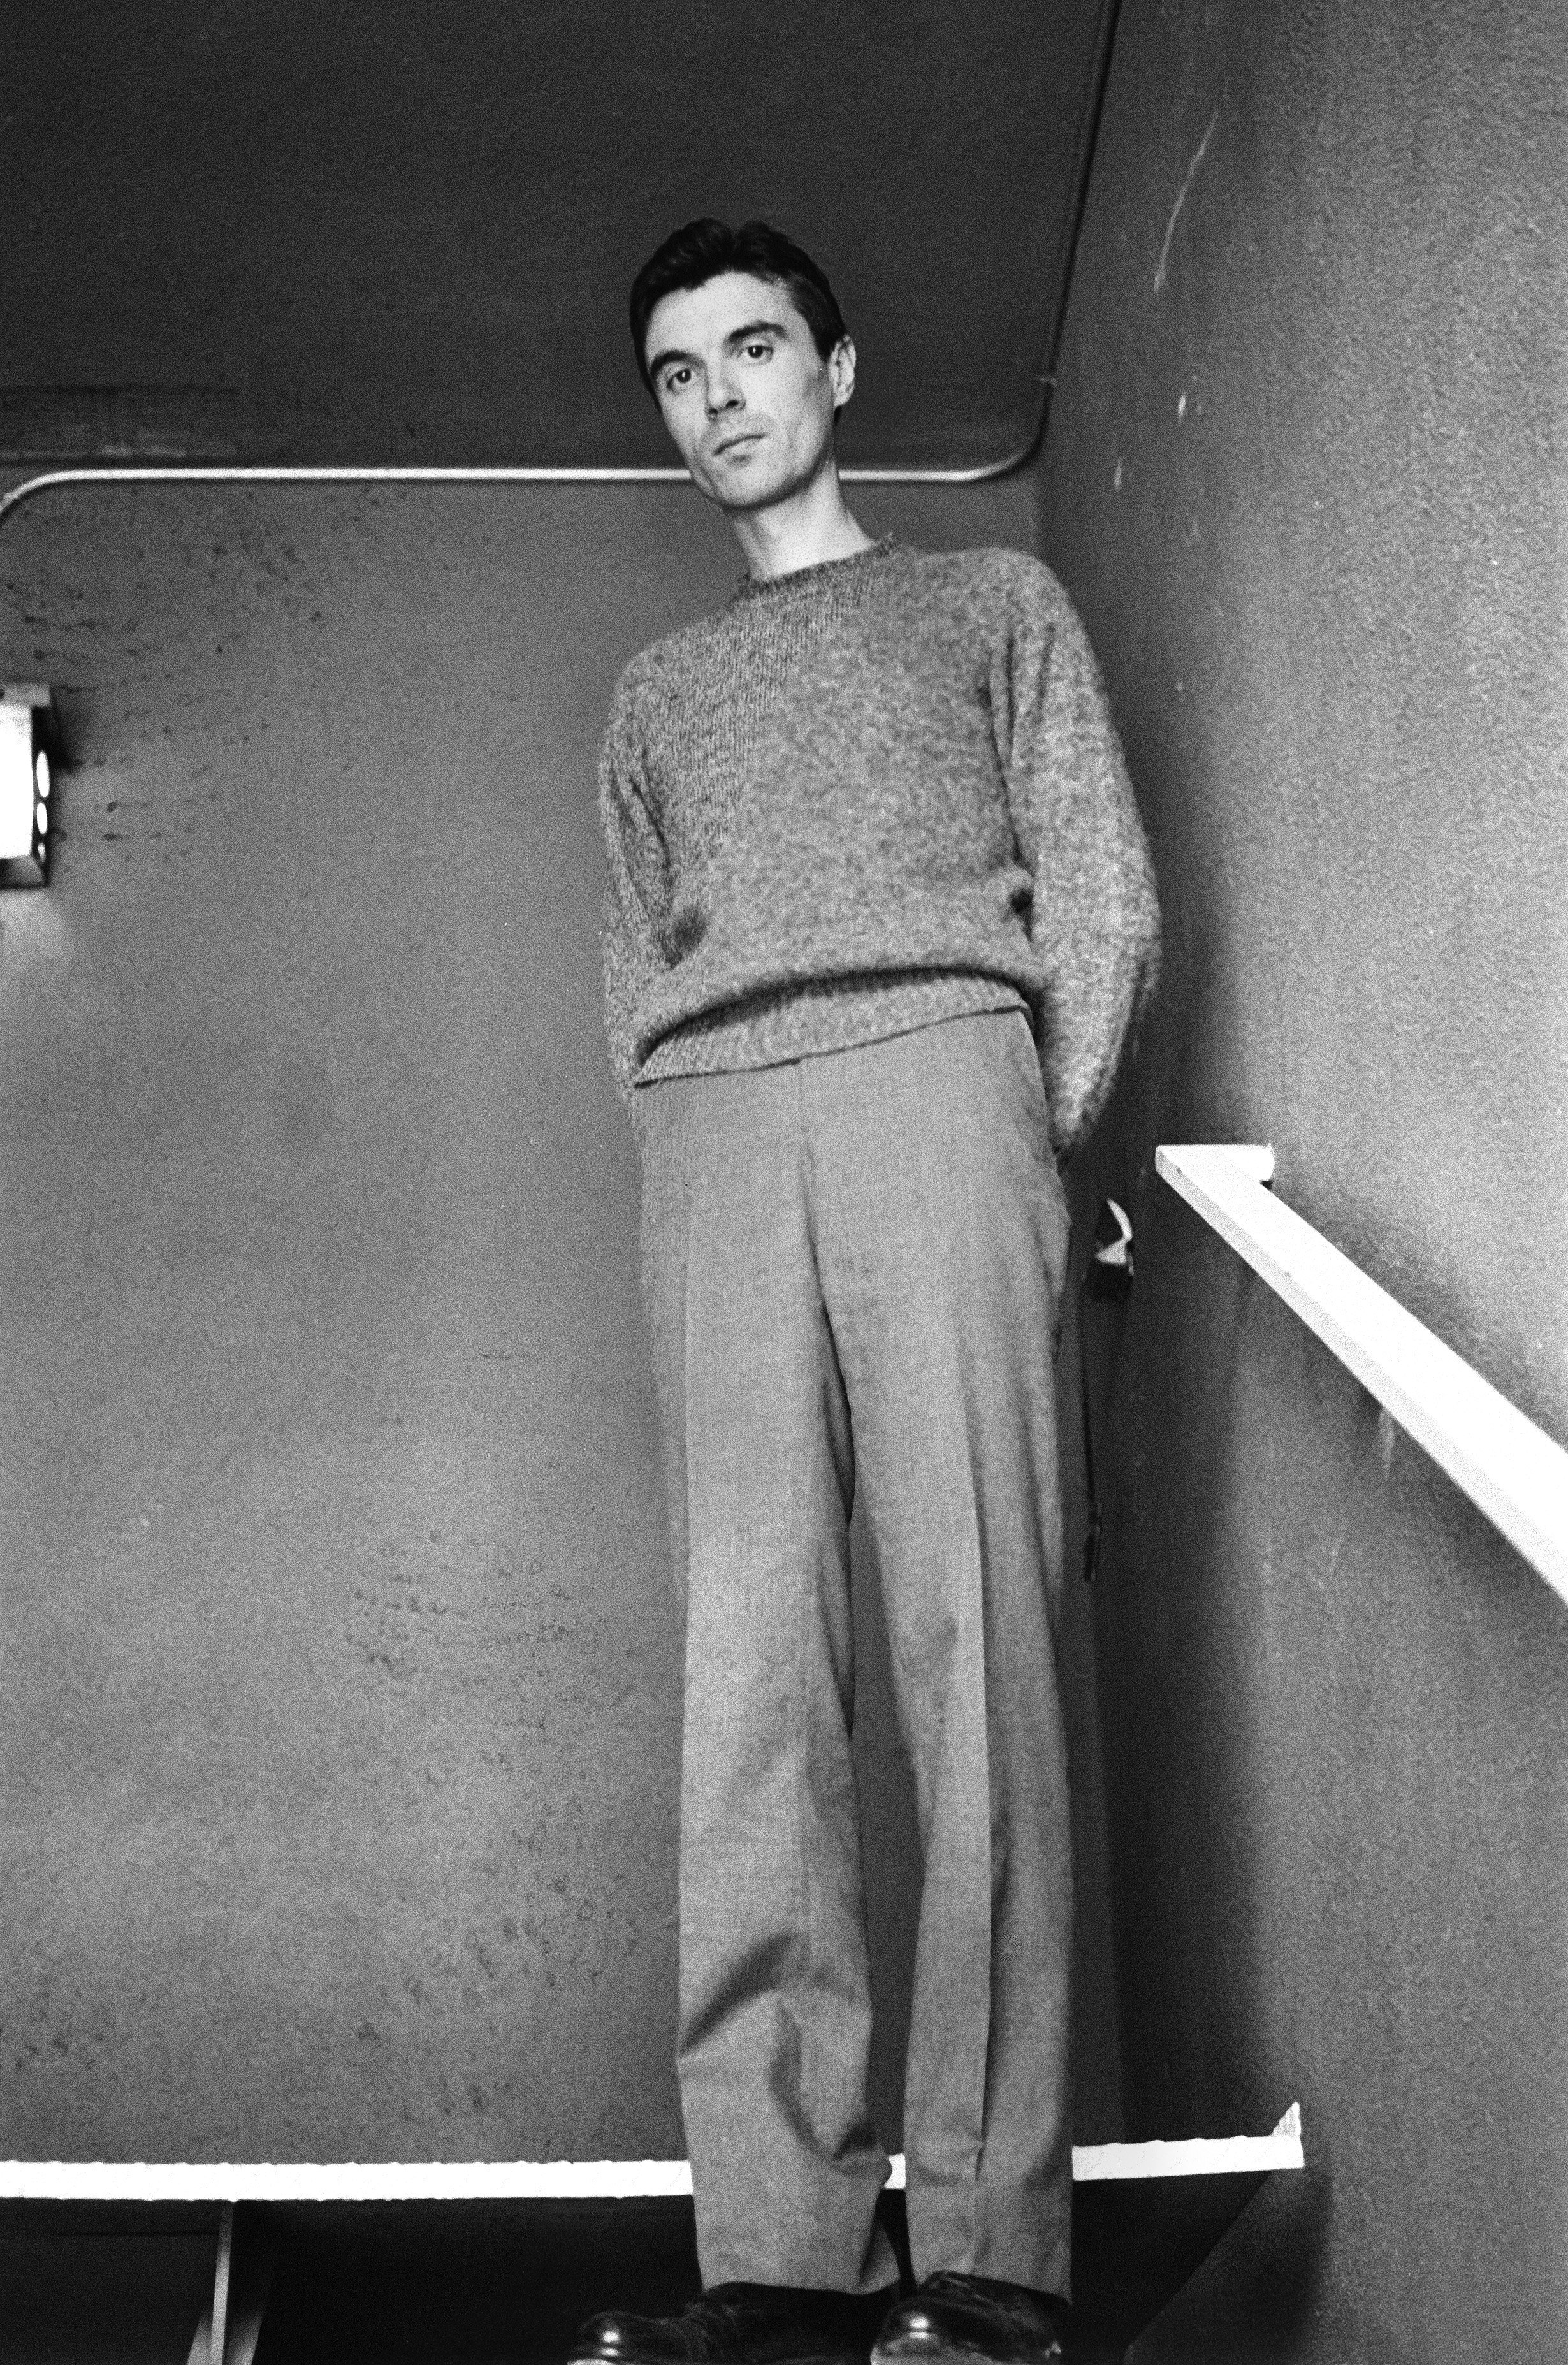 David Byrne at the Sunset Hotel in 1980